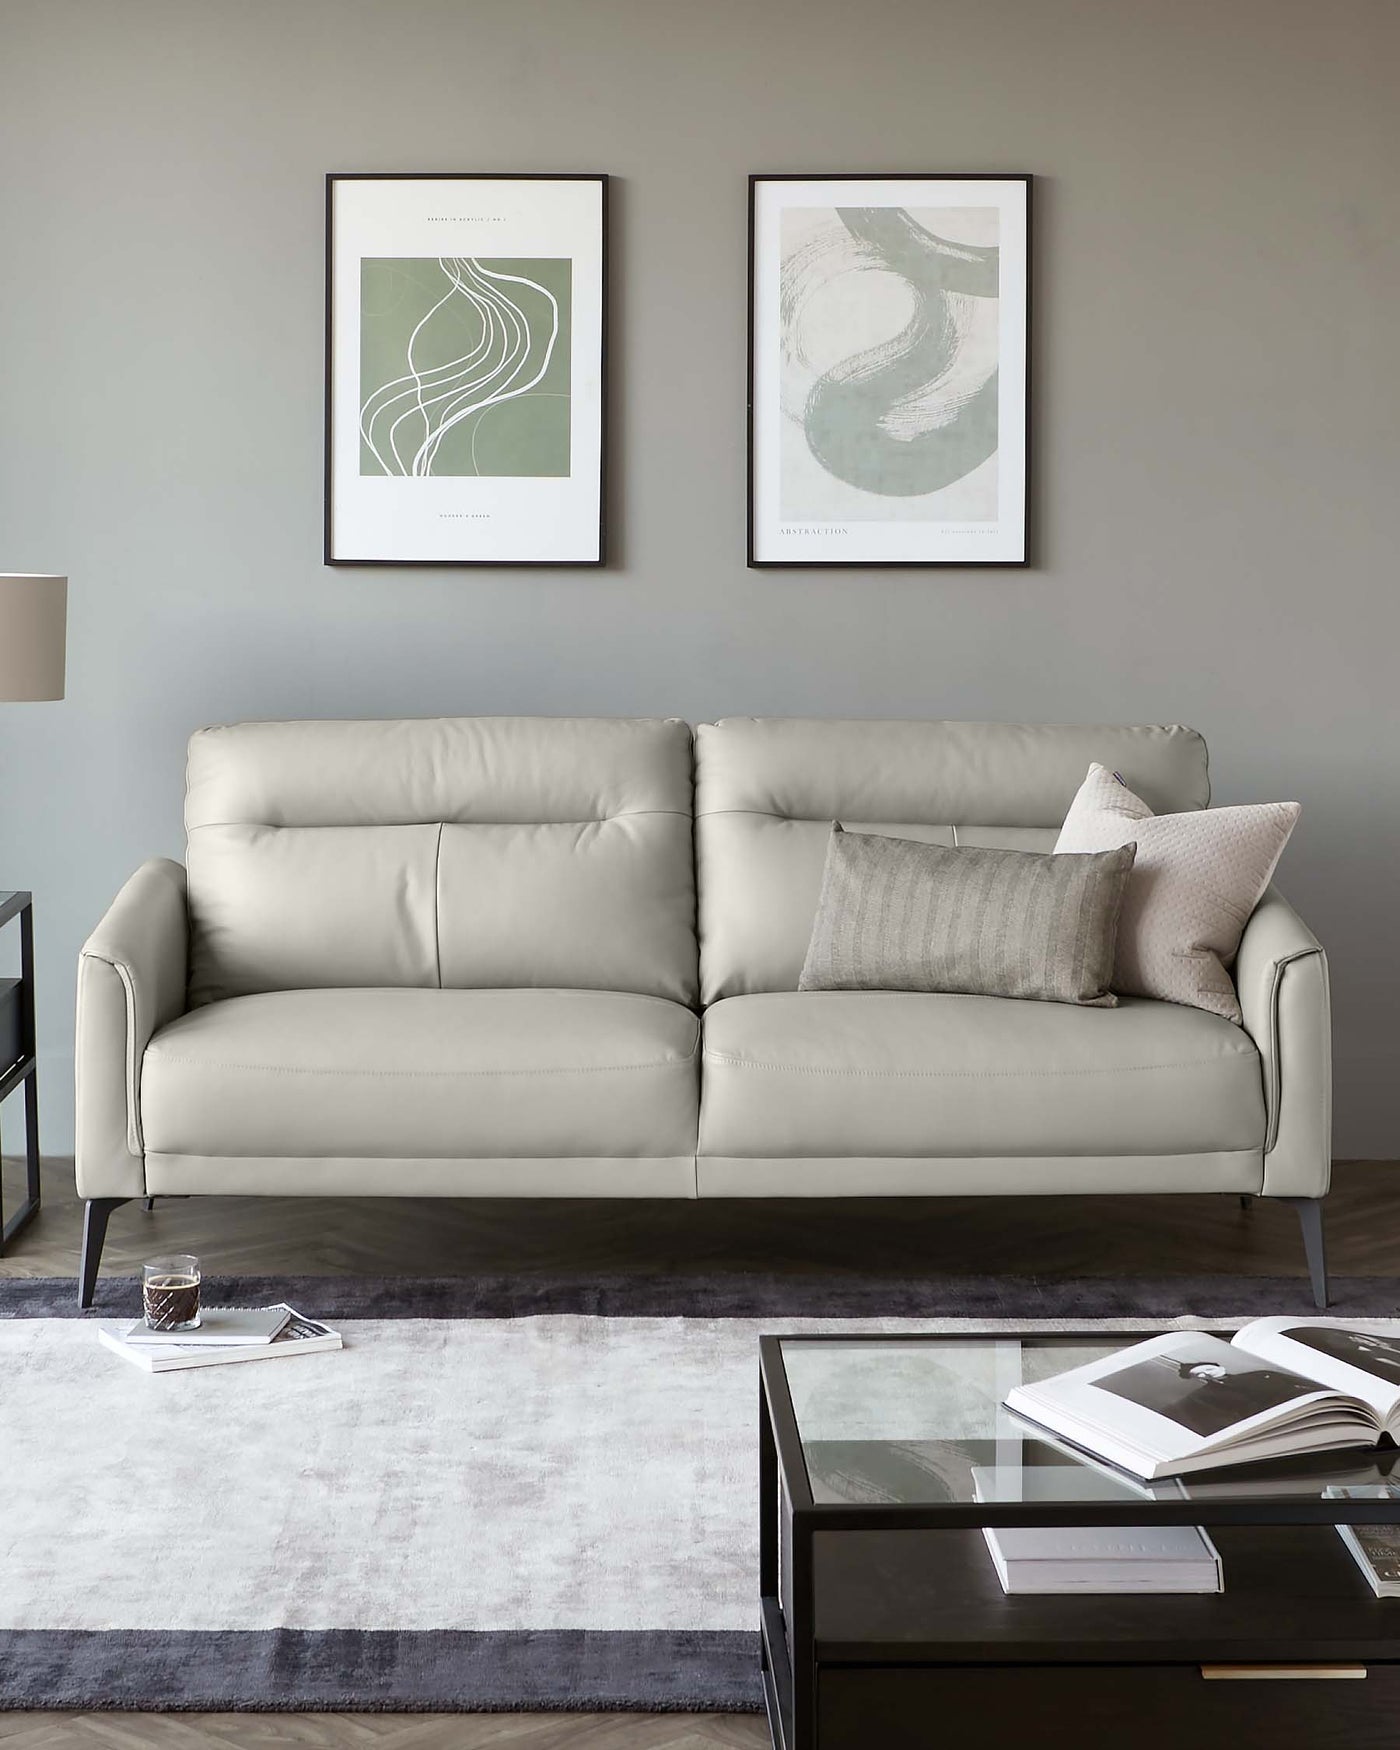 Elegant contemporary living room with a light grey upholstered three-seater sofa featuring plush cushioning and minimalist armrest design. Paired with the sofa is a sleek black glass-top coffee table with a modern geometric frame. The furniture is set on a soft gradient grey area rug, which adds to the room's sophisticated neutral colour palette. Two framed abstract artworks hang on the wall above the sofa, enhancing the modern aesthetic of the space.